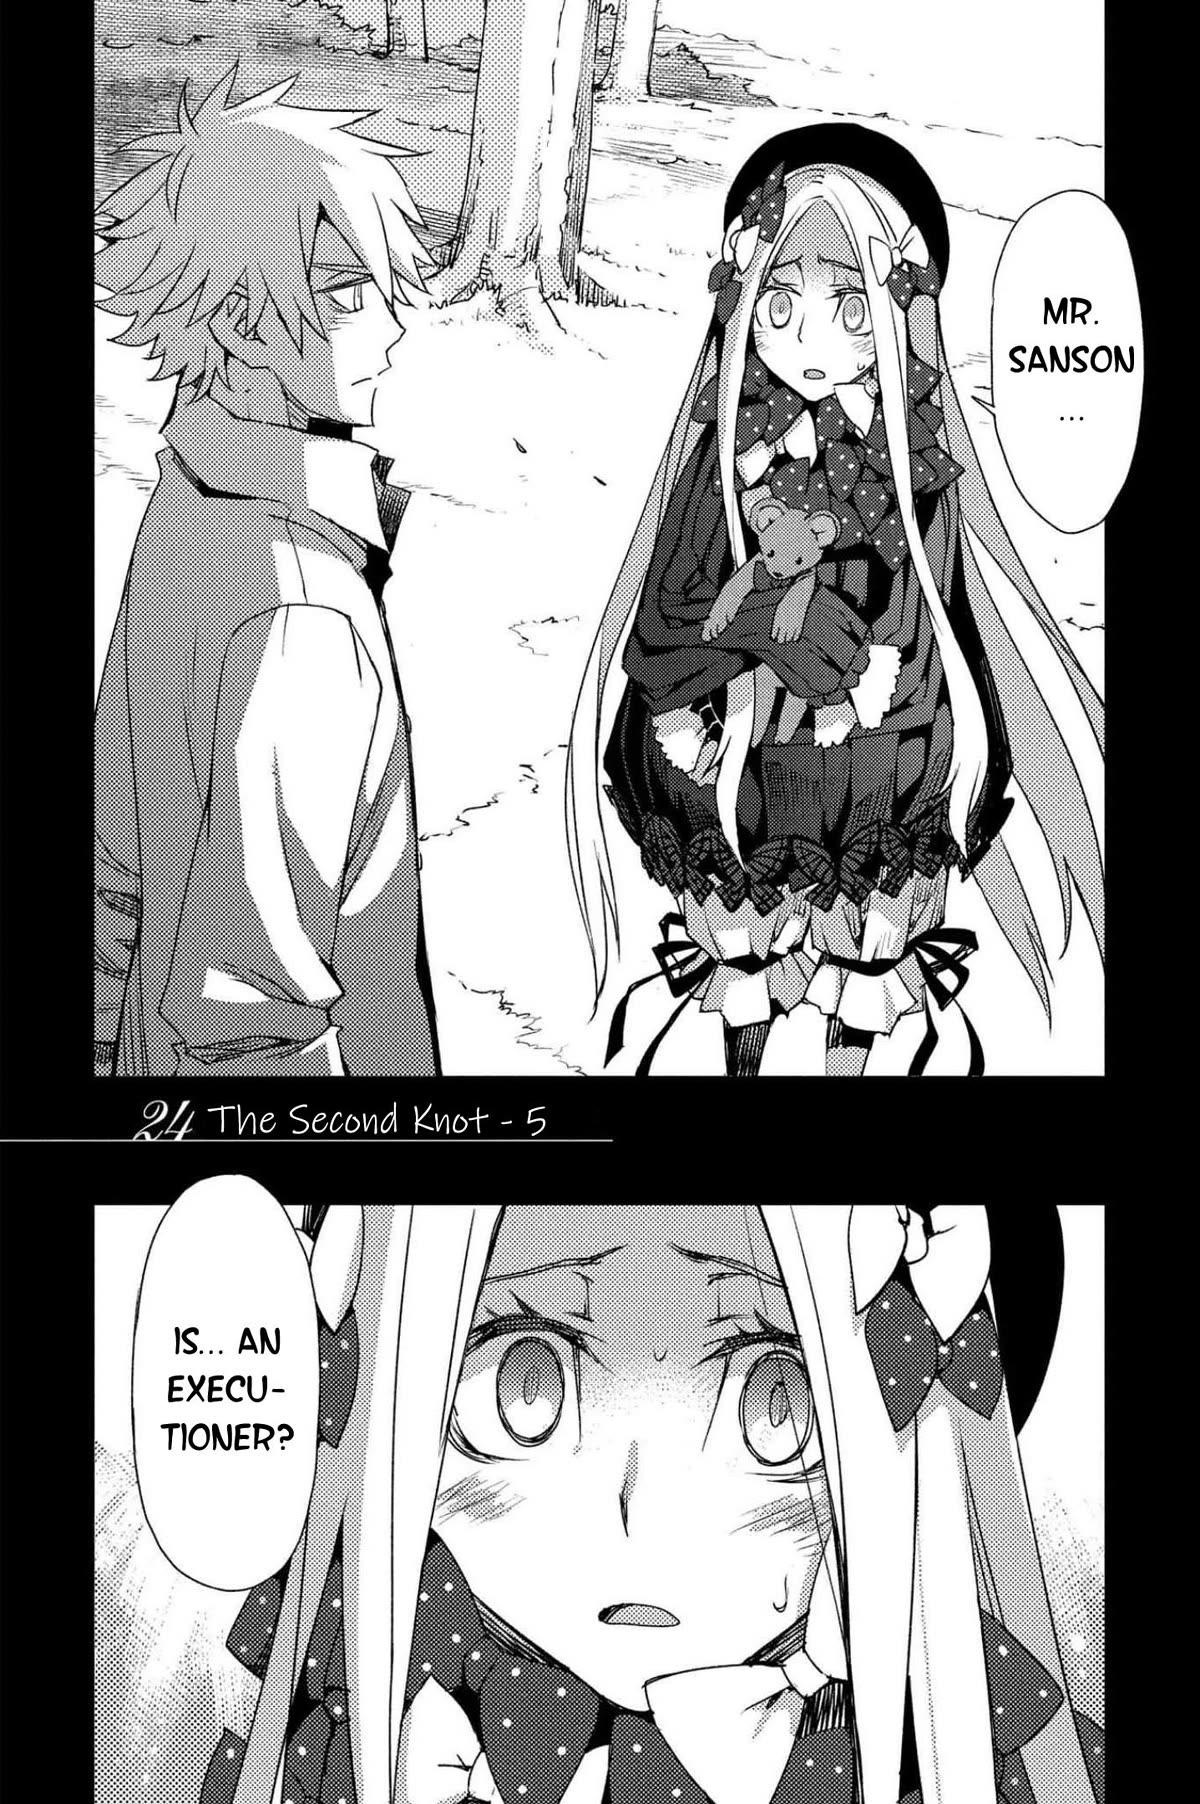 Fate/grand Order: Epic Of Remnant - Subspecies Singularity Iv: Taboo Advent Salem: Salem Of Heresy Chapter 24: The Second Knot - 5 - Picture 1